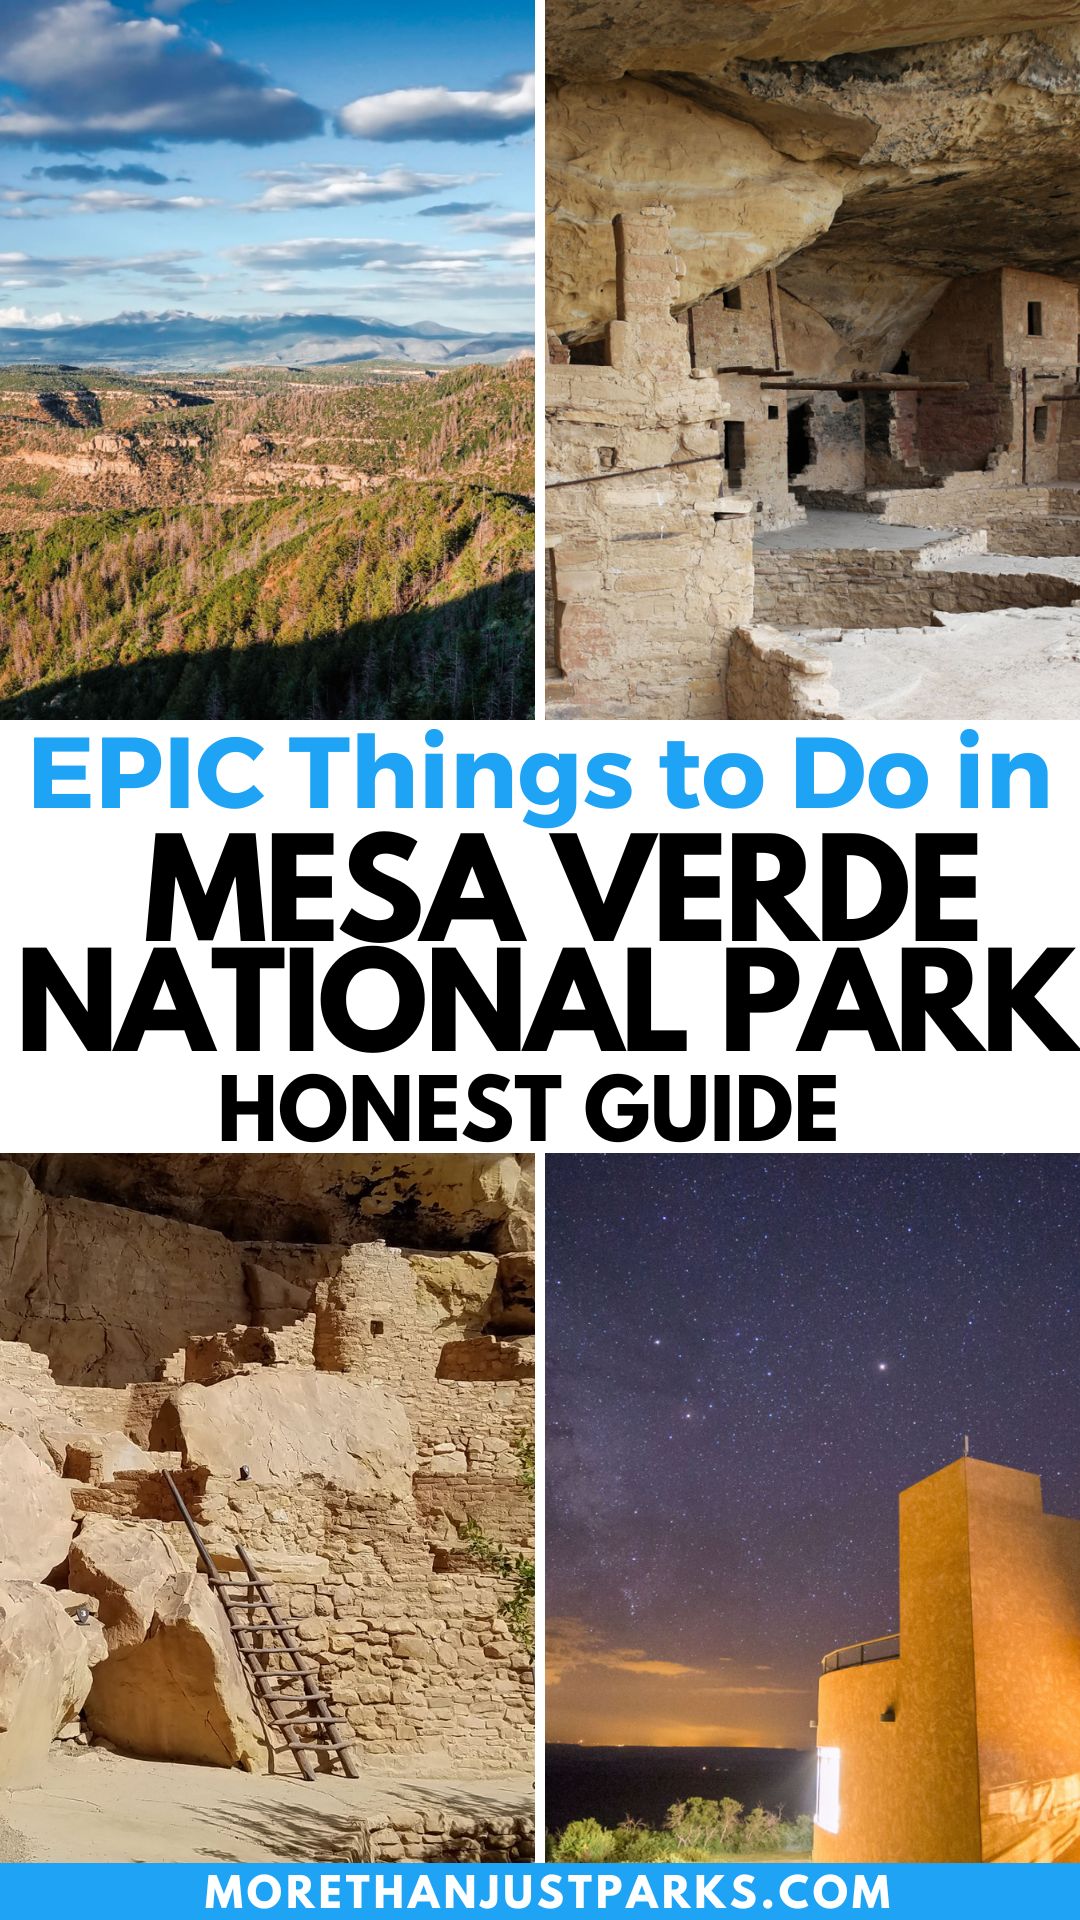 Things to Do in Mesa Verde National Park